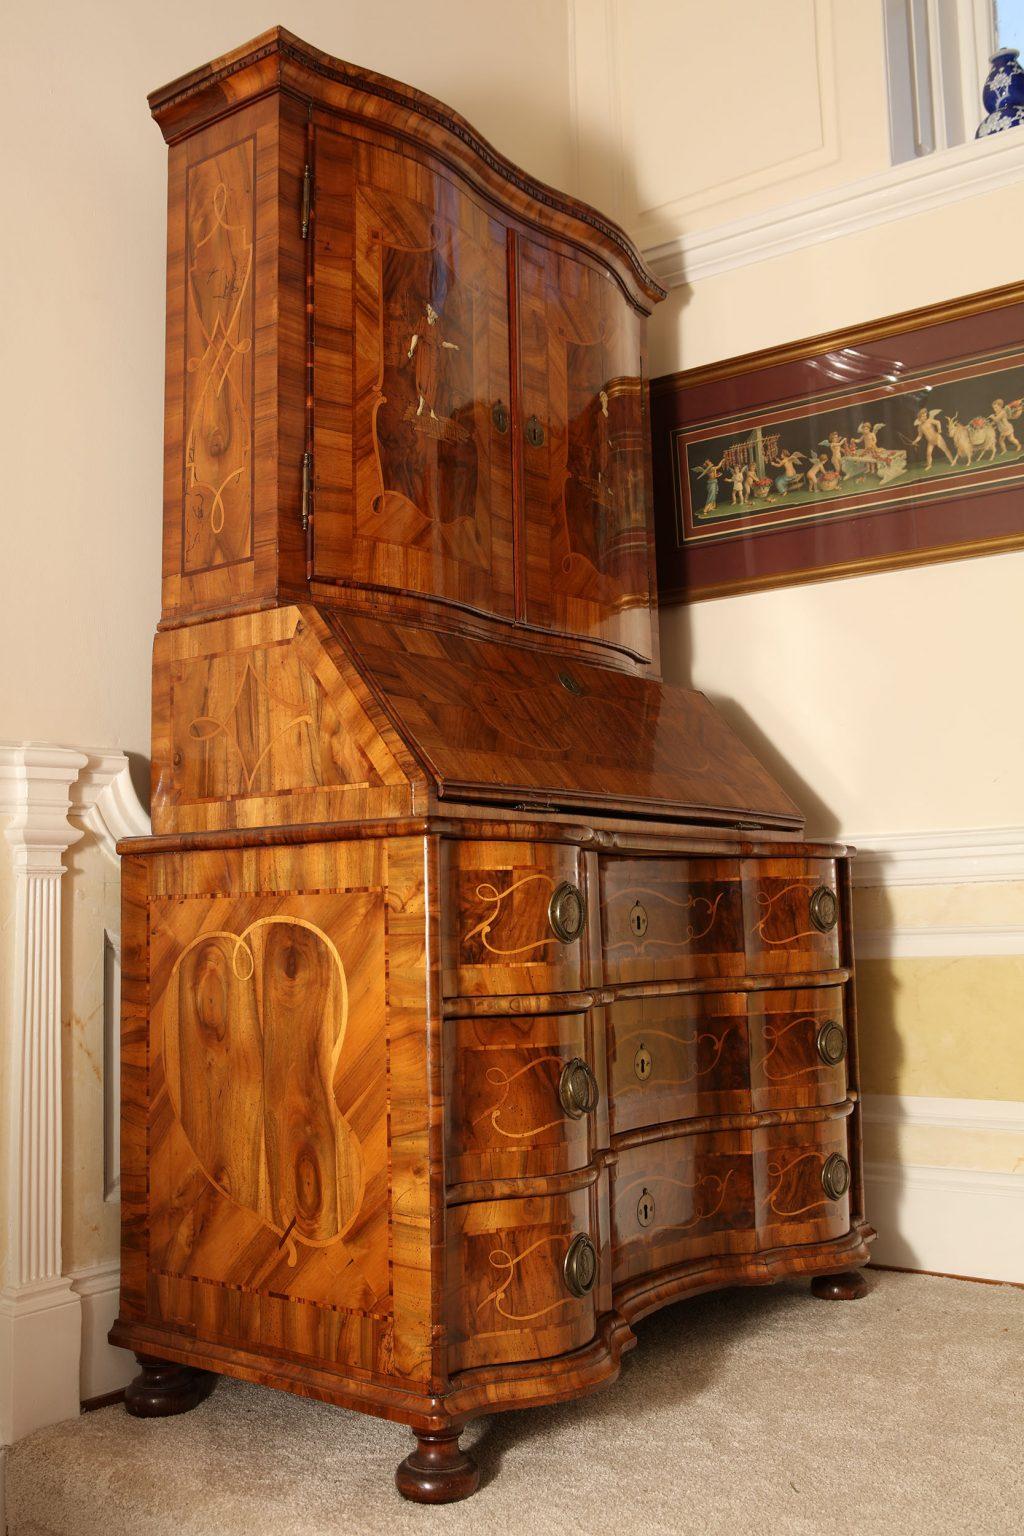 A fine mid-18th century bureau cabinet, the upper with two curved doors inlaid with two classical figures. Above a fall front opening to pigeon holes and drawers, above three serpentine long drawers with marquetry inlay, later ring handles with the